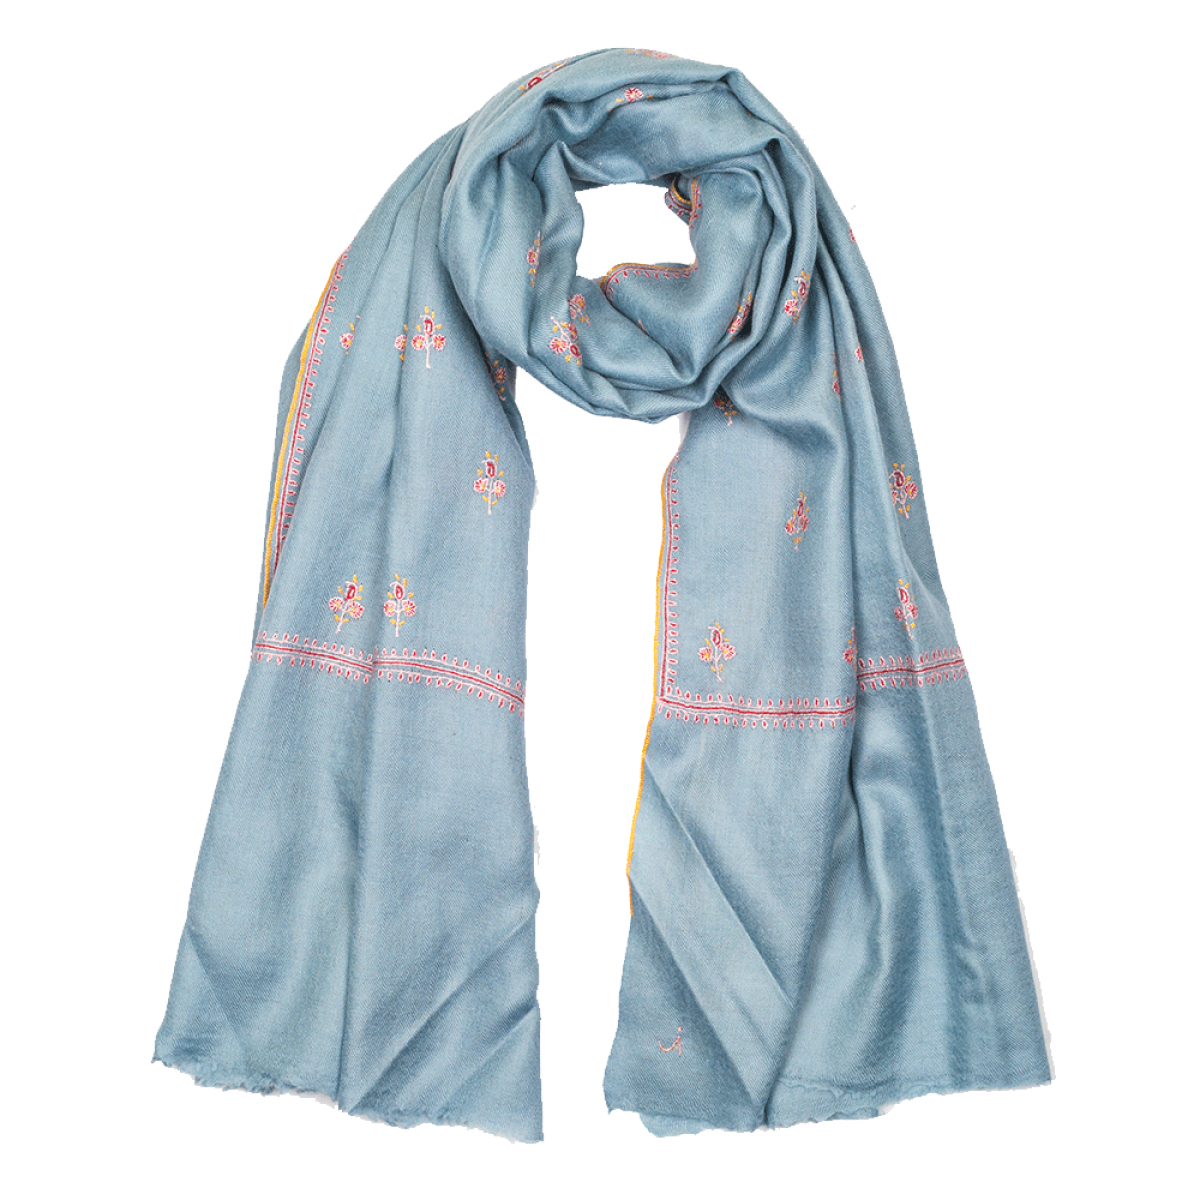 Embroidered Pashmina Stole - Light Blue & Yellow